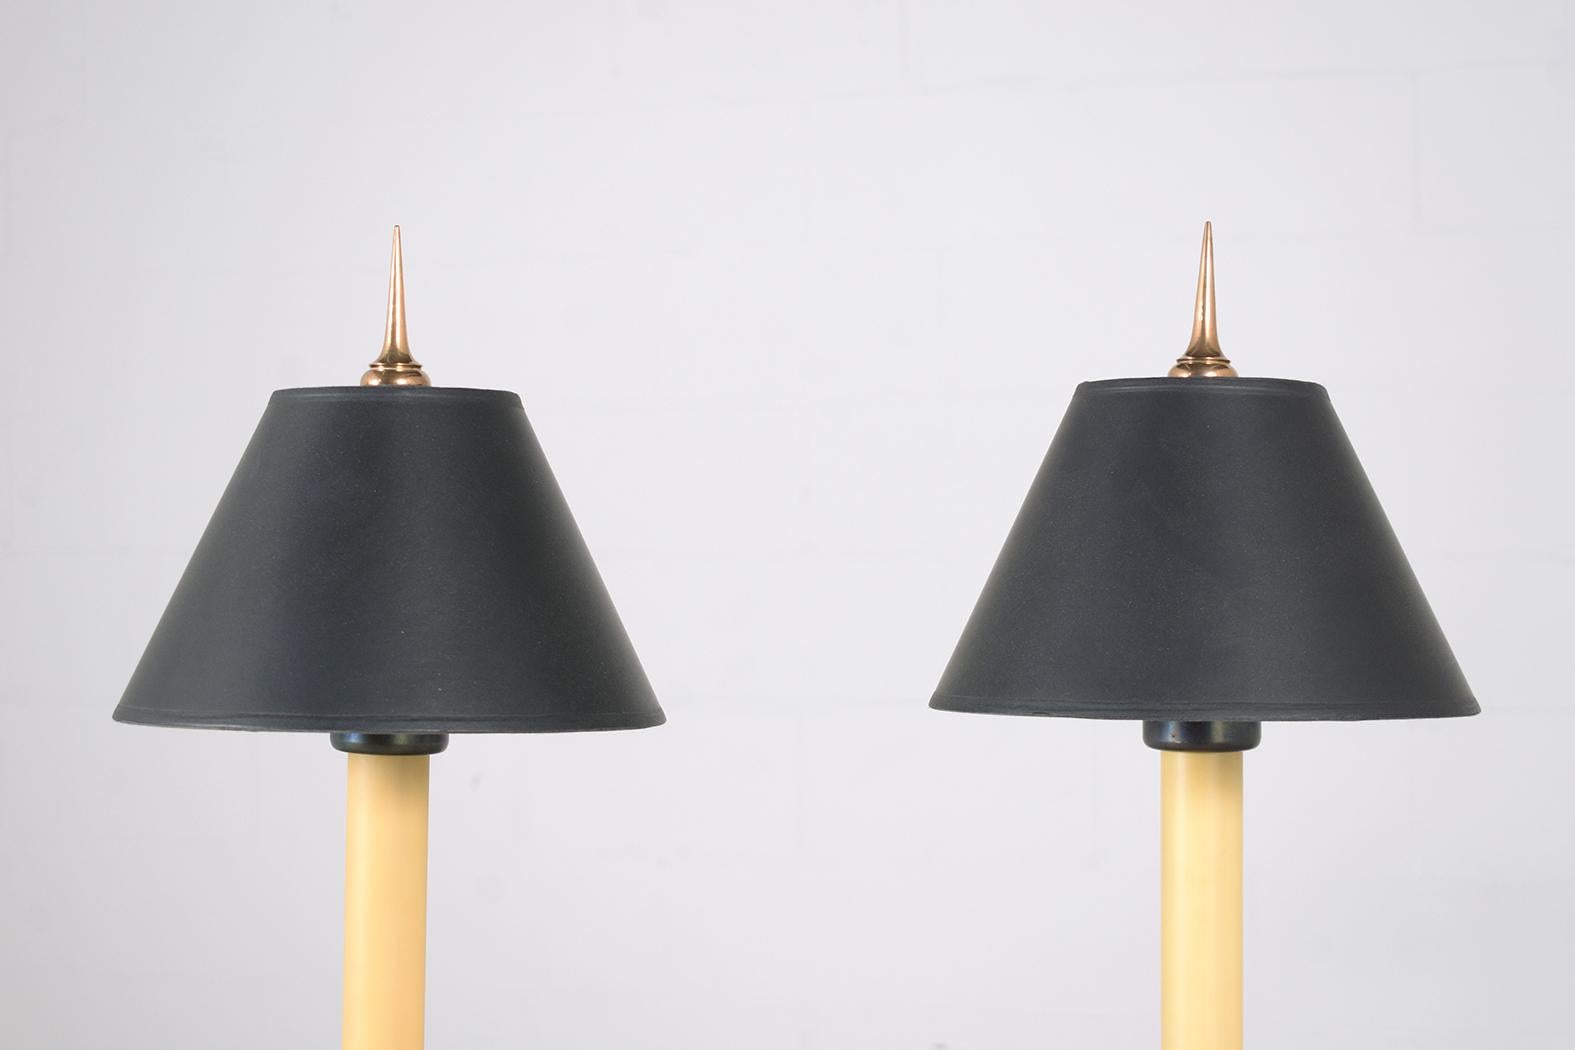 American Pair of 1960s Hollywood Regency Style Table Lamps: Vintage Opulence Reimagined